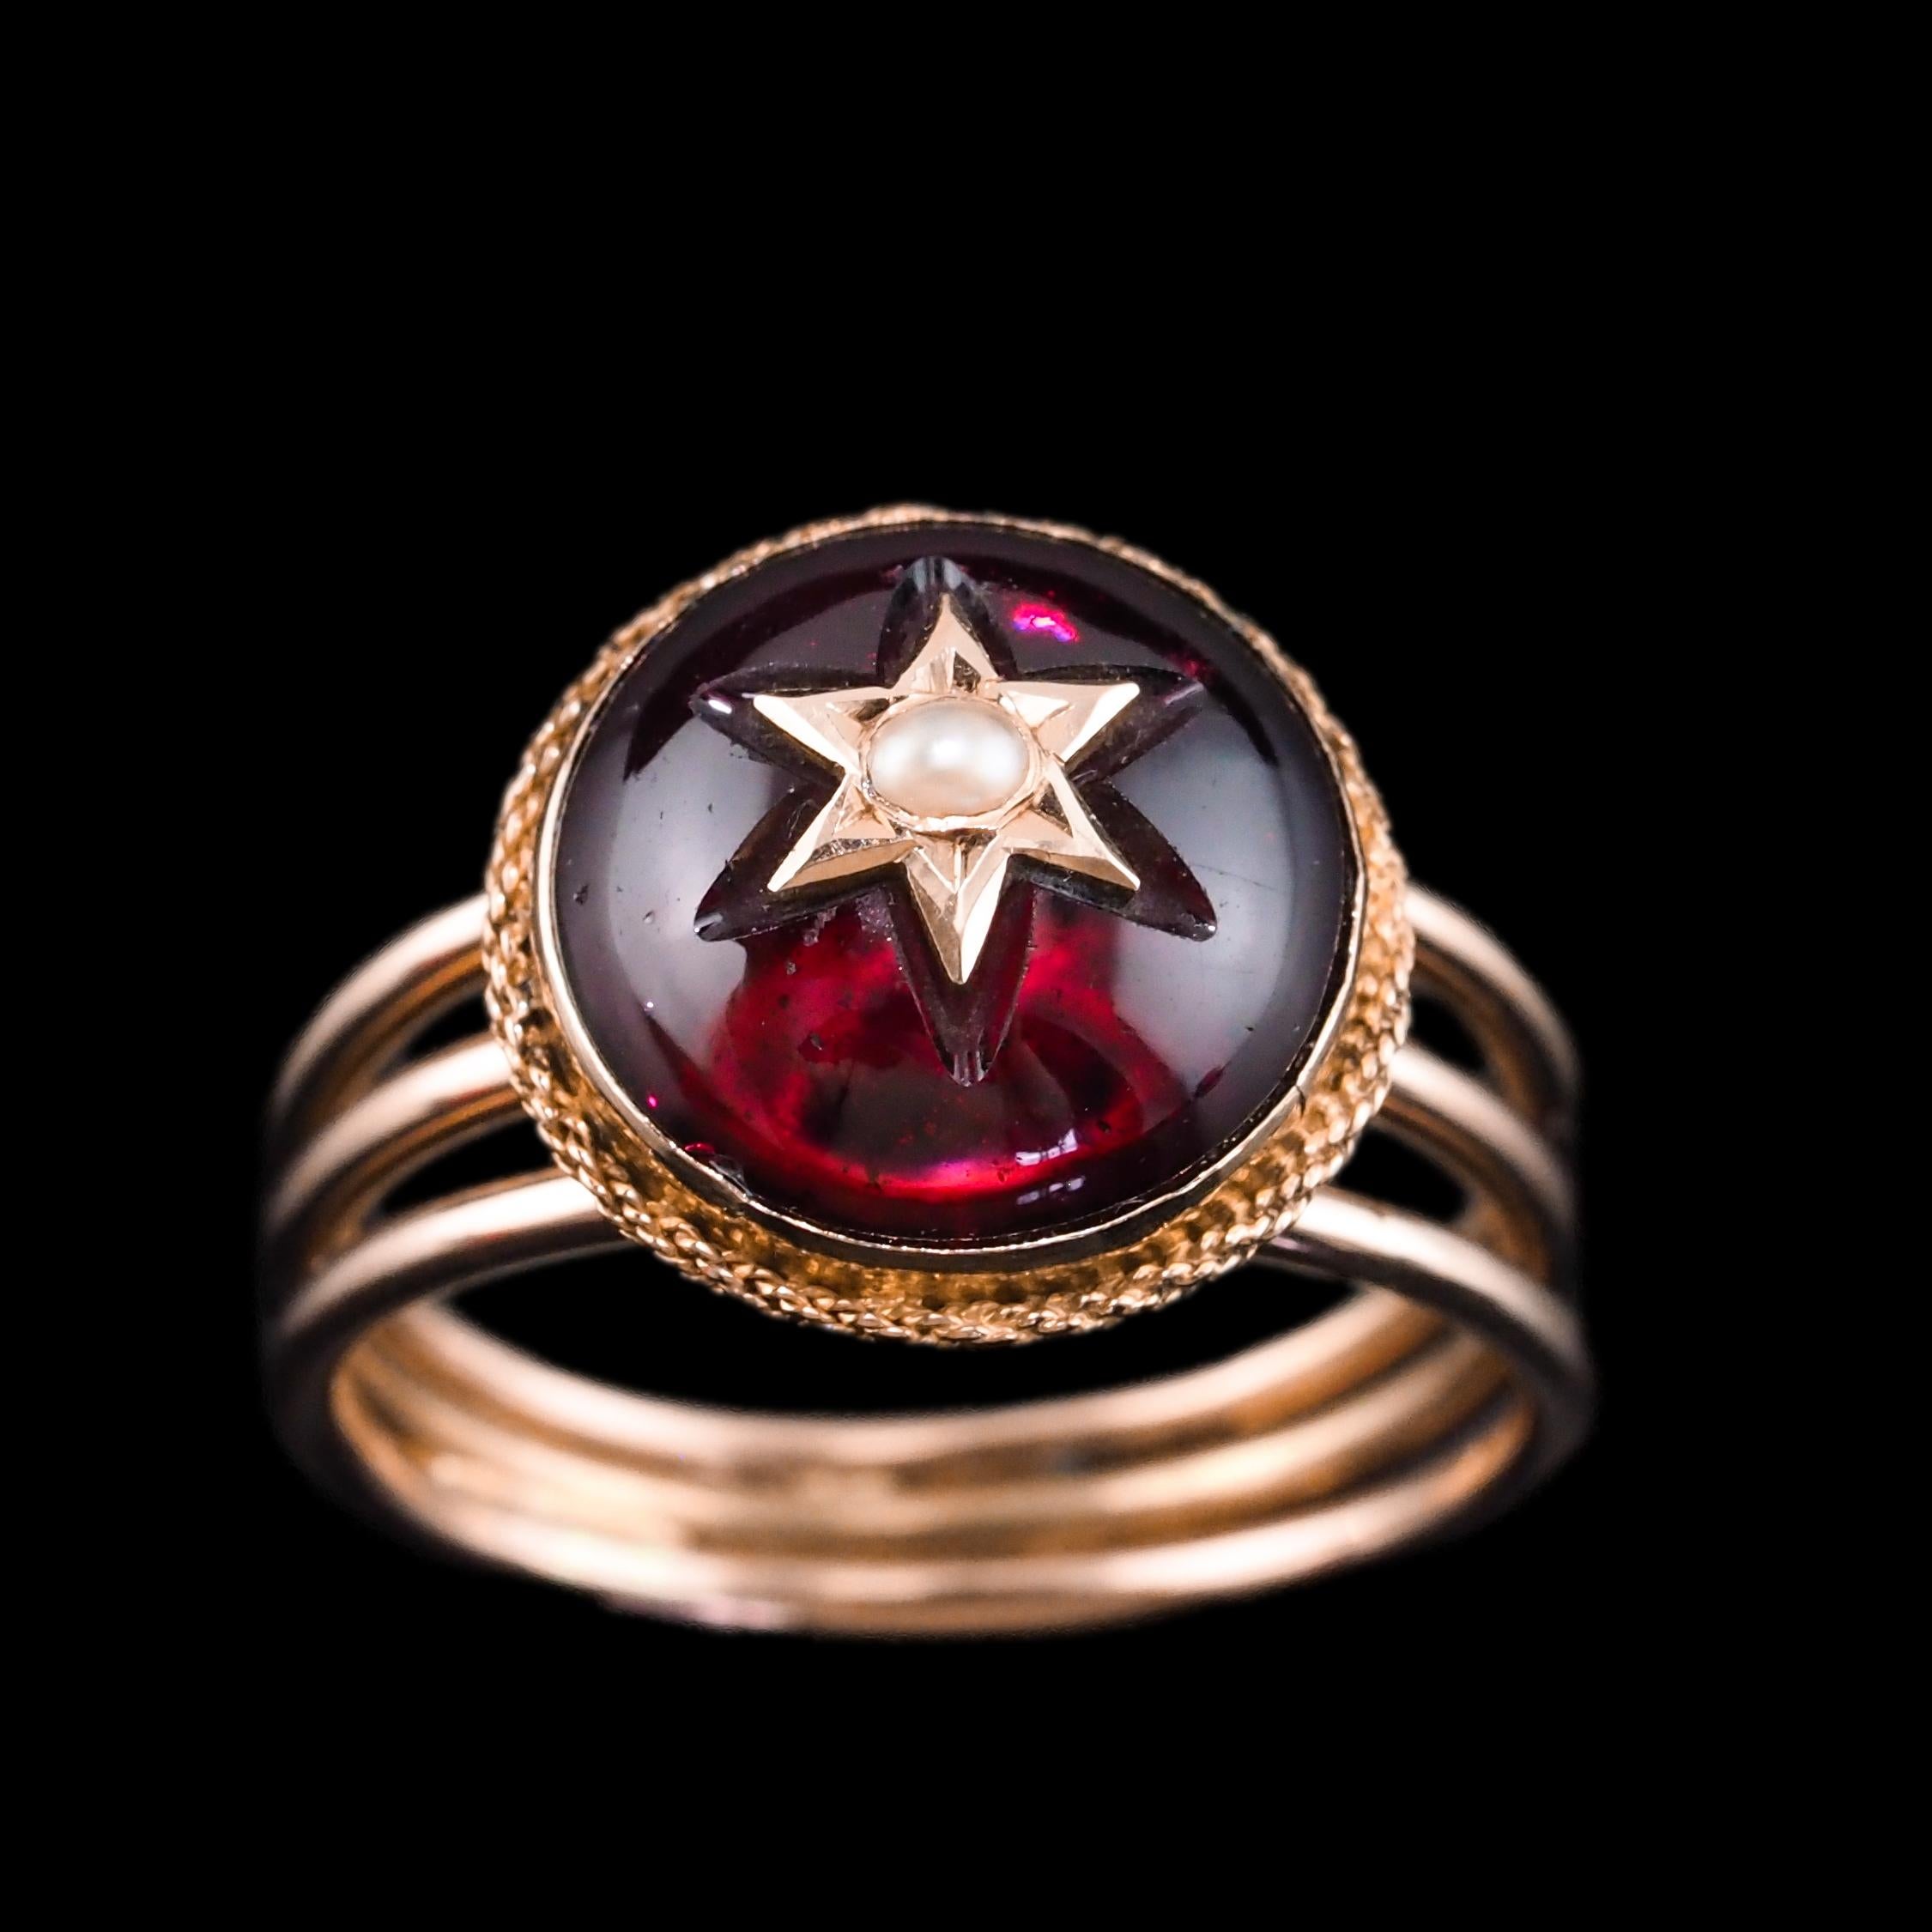 We are delighted to offer this exquisite antique Victorian garnet cabochon and seed pearl star ring made c.1880.
 
Unapologetically Victorian, this ring features some of the most desirable and stylish elements of the period. A celestial theme/style